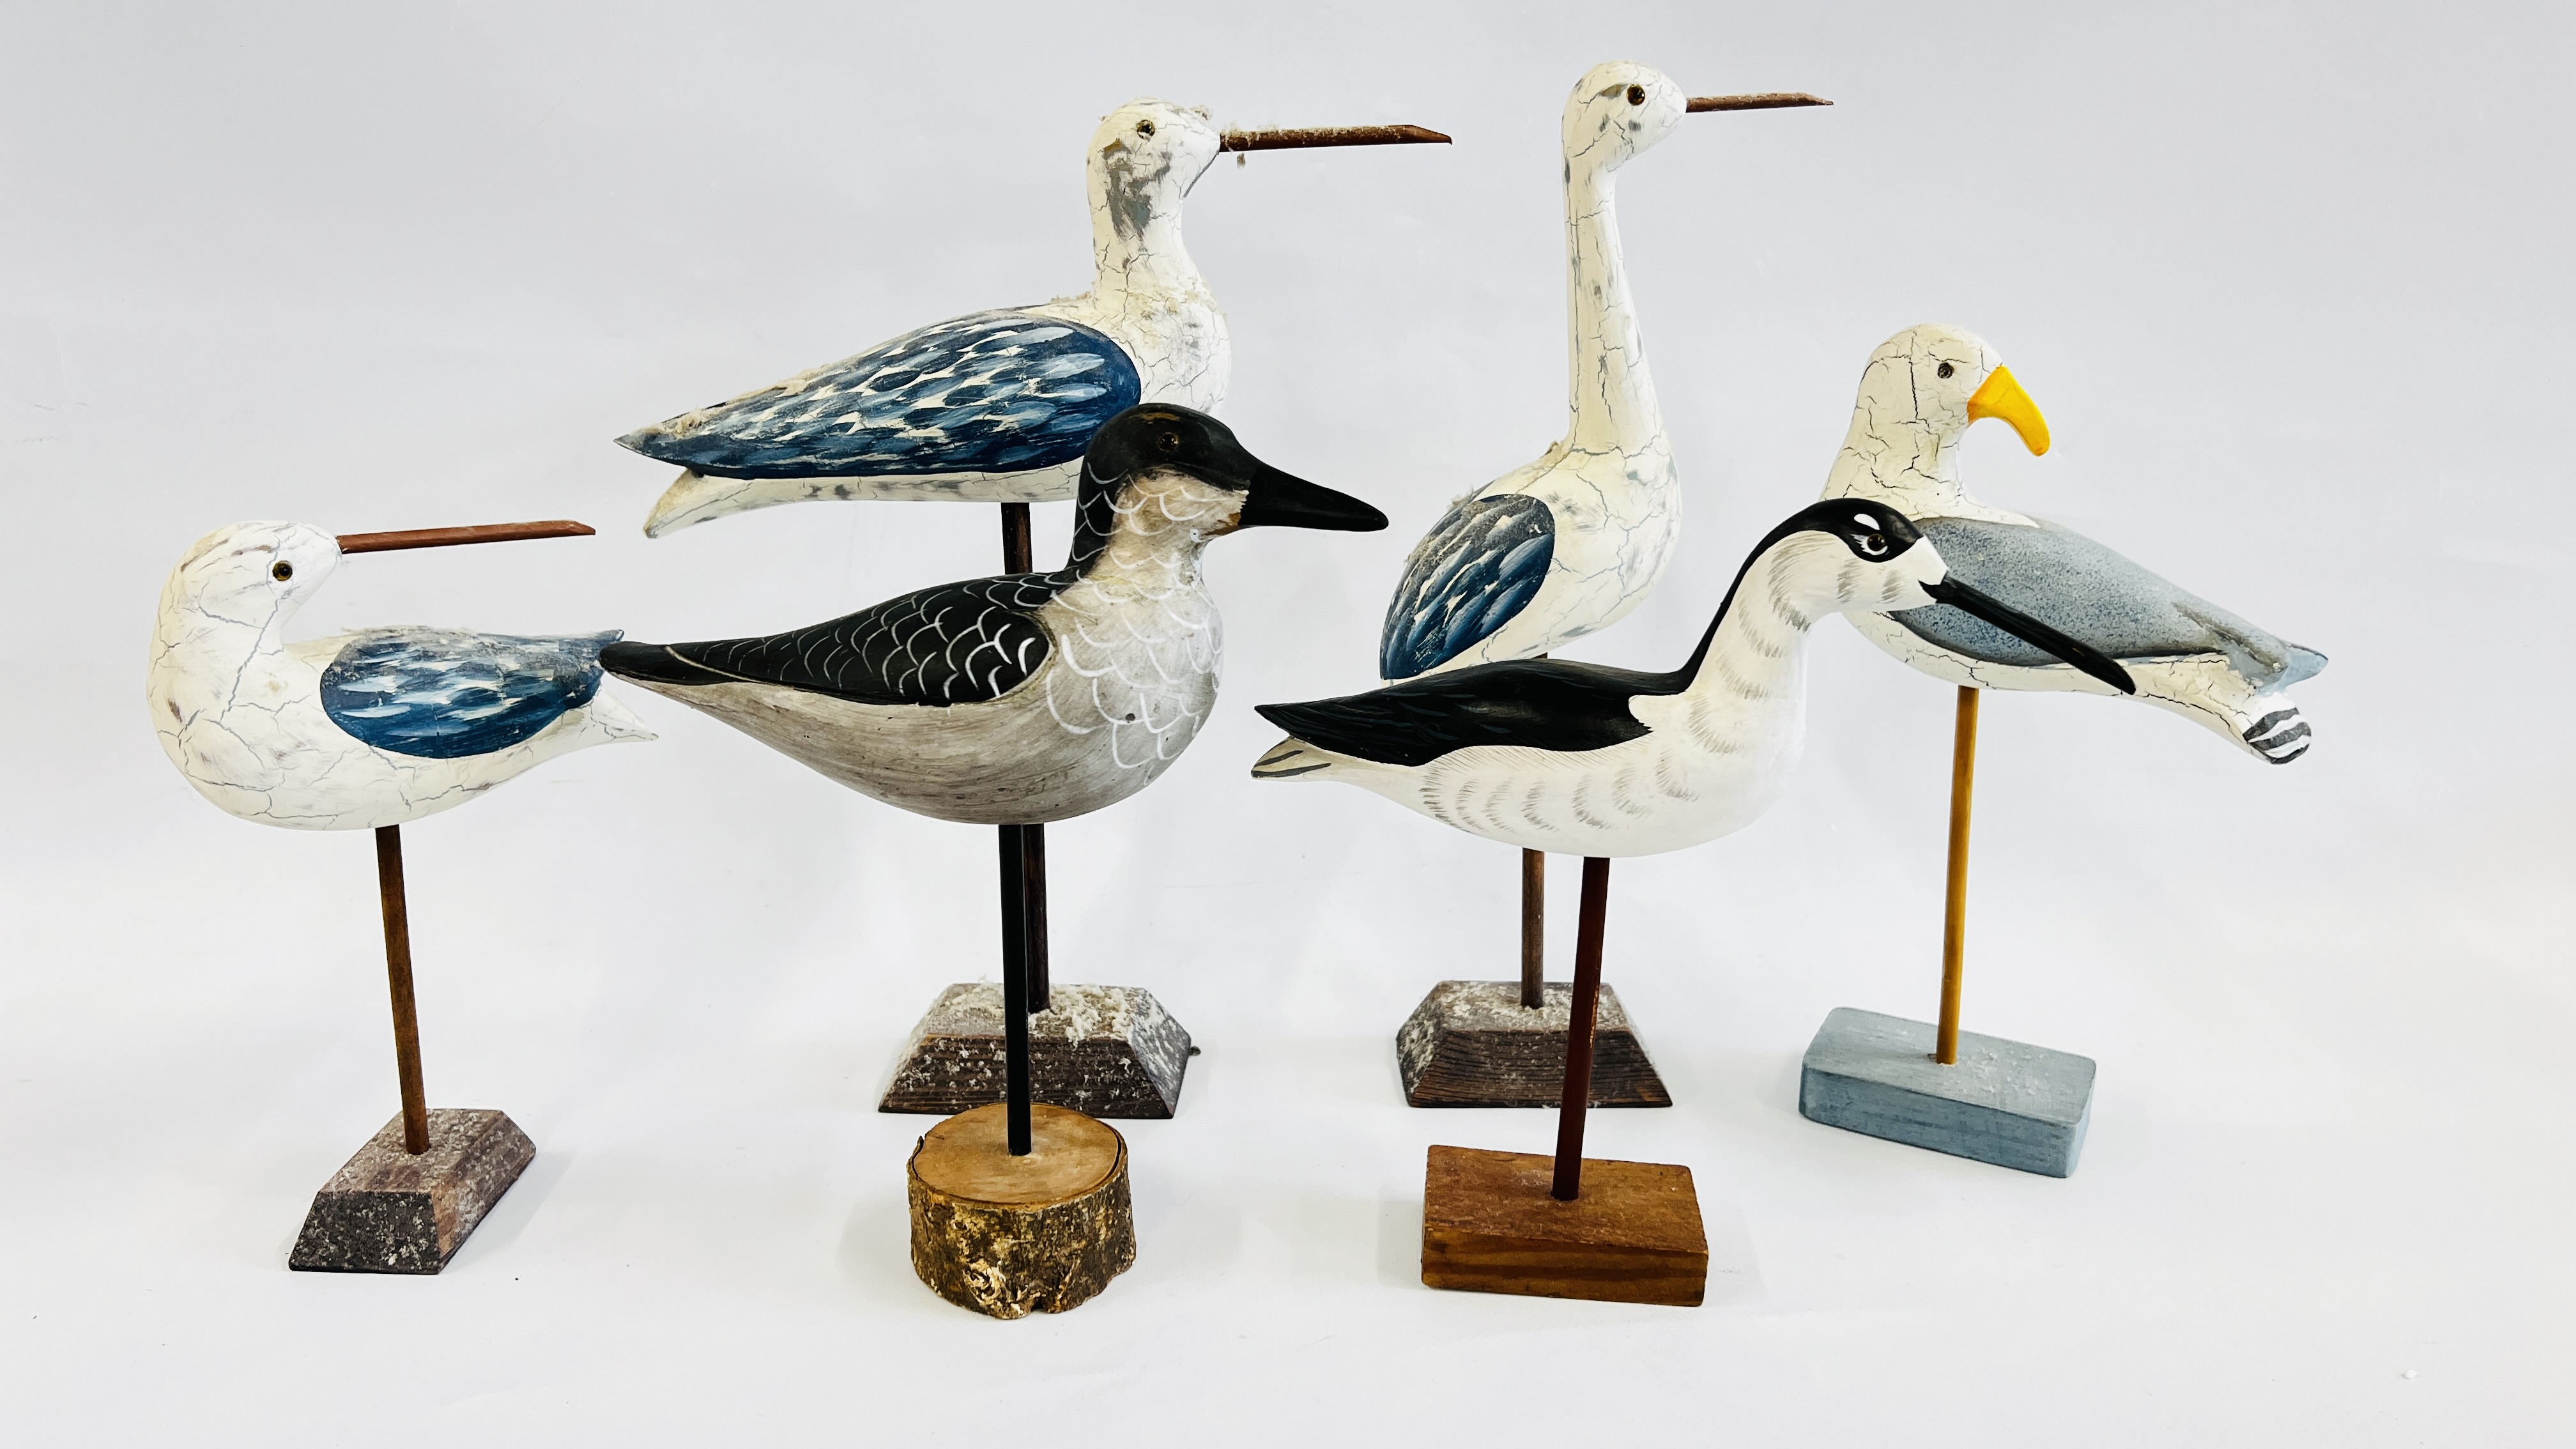 A GROUP OF 6 HAND CRAFTED WOODEN STUDIO BIRD STUDIES.